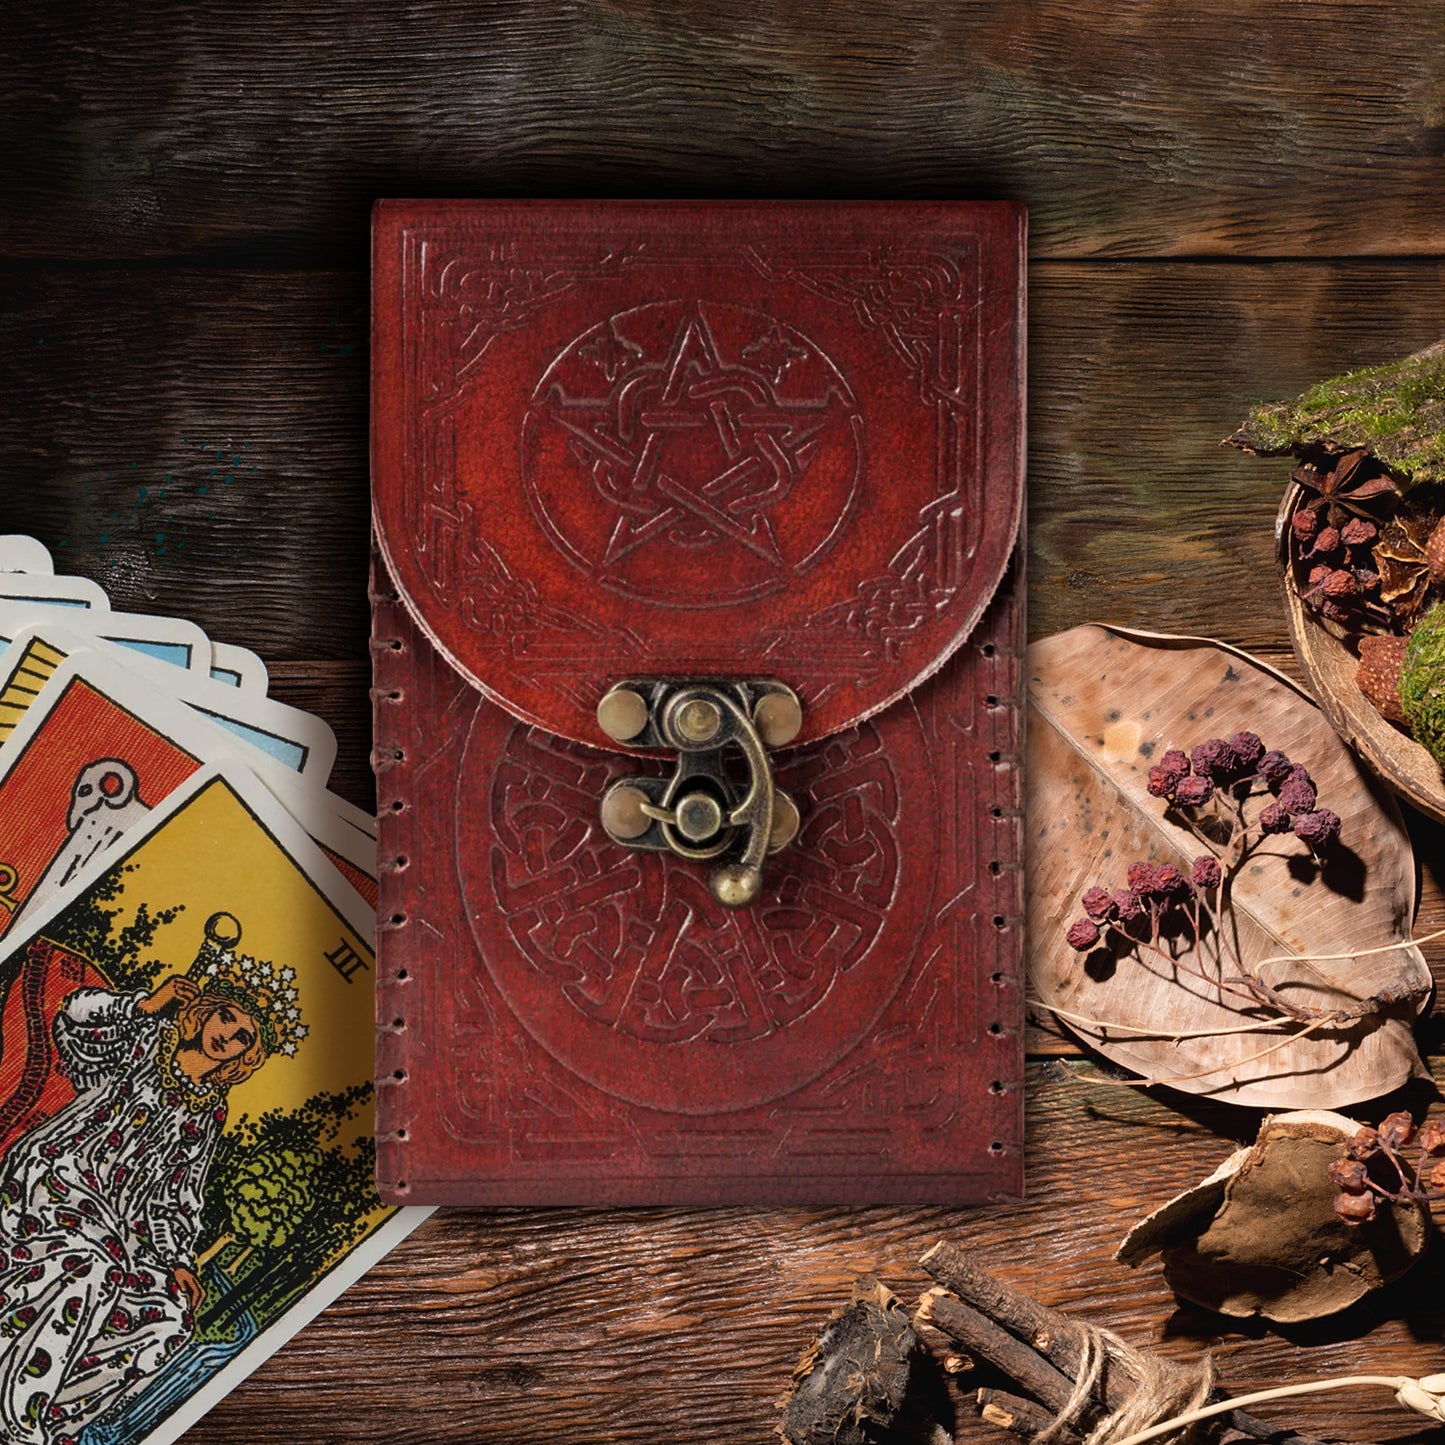 A reddish-brown leather tarot card holder with a brass closure clasp. The leather is embossed with a tarot-art-style pentagram on the front flap, and a Celtic knot on the bottom front.